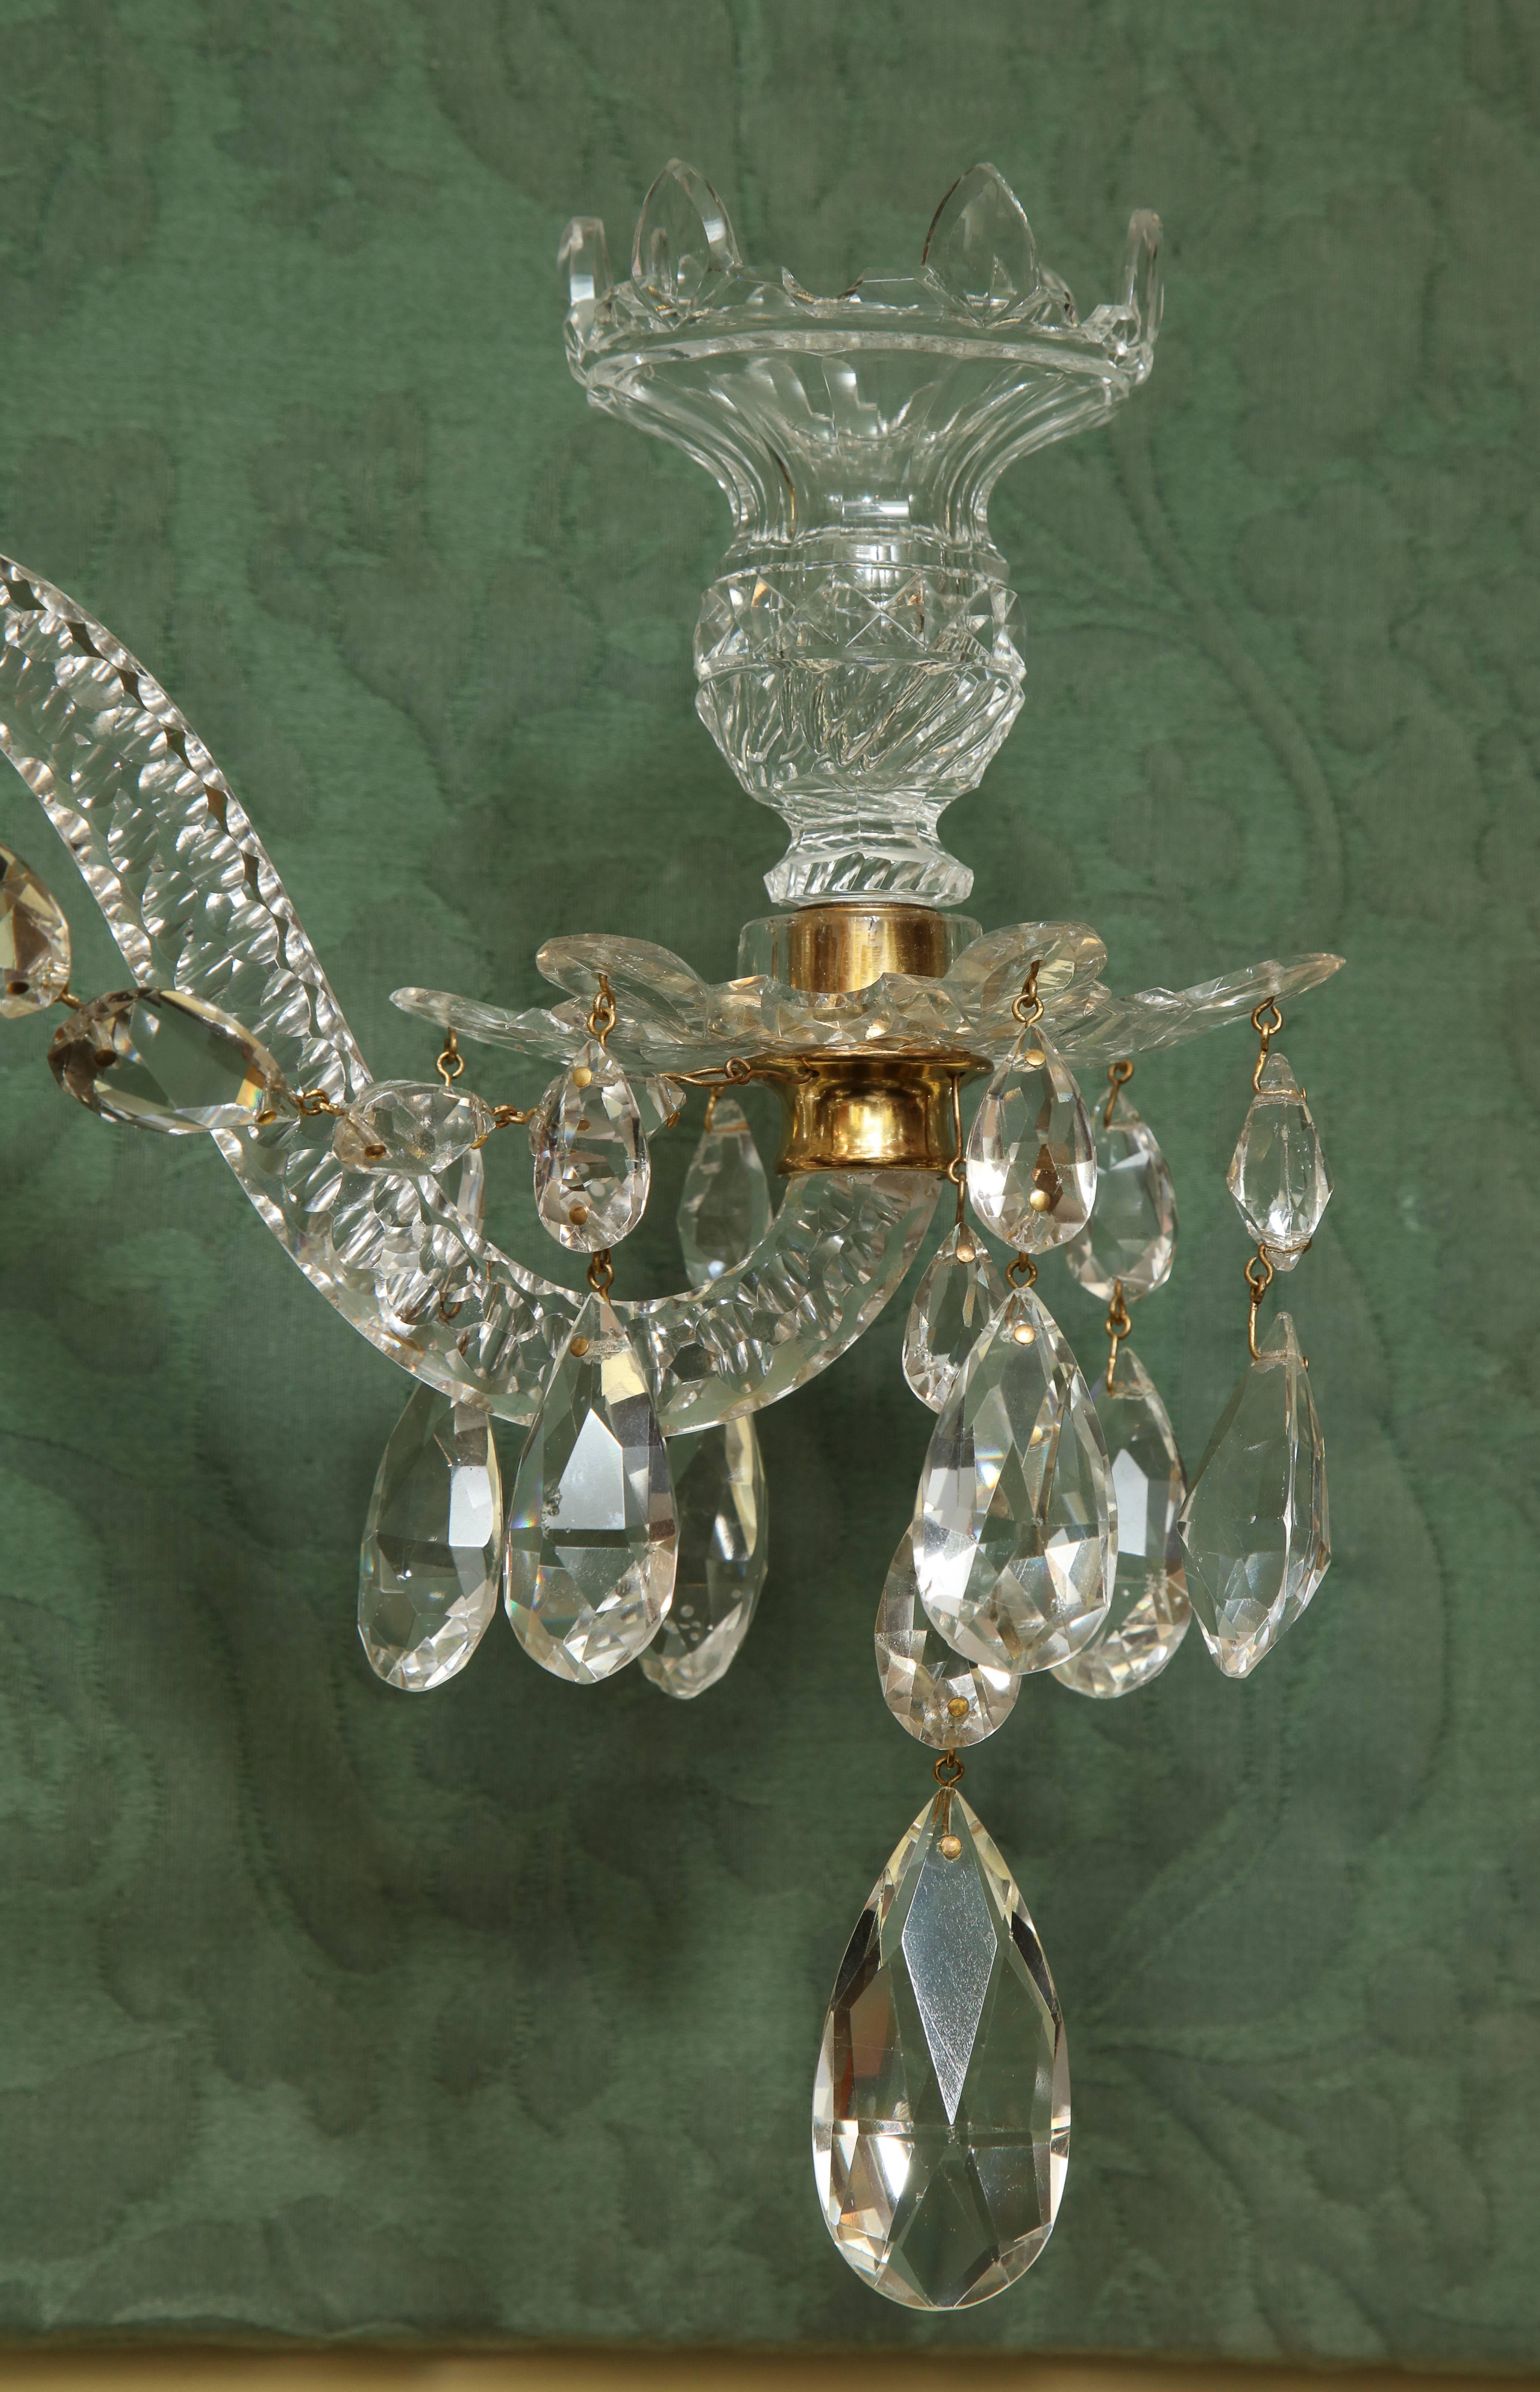 Pair of Adam Cut Crystal and Ormolu Two-Light Wall Sconces, English, circa 1775 In Excellent Condition For Sale In New York, NY